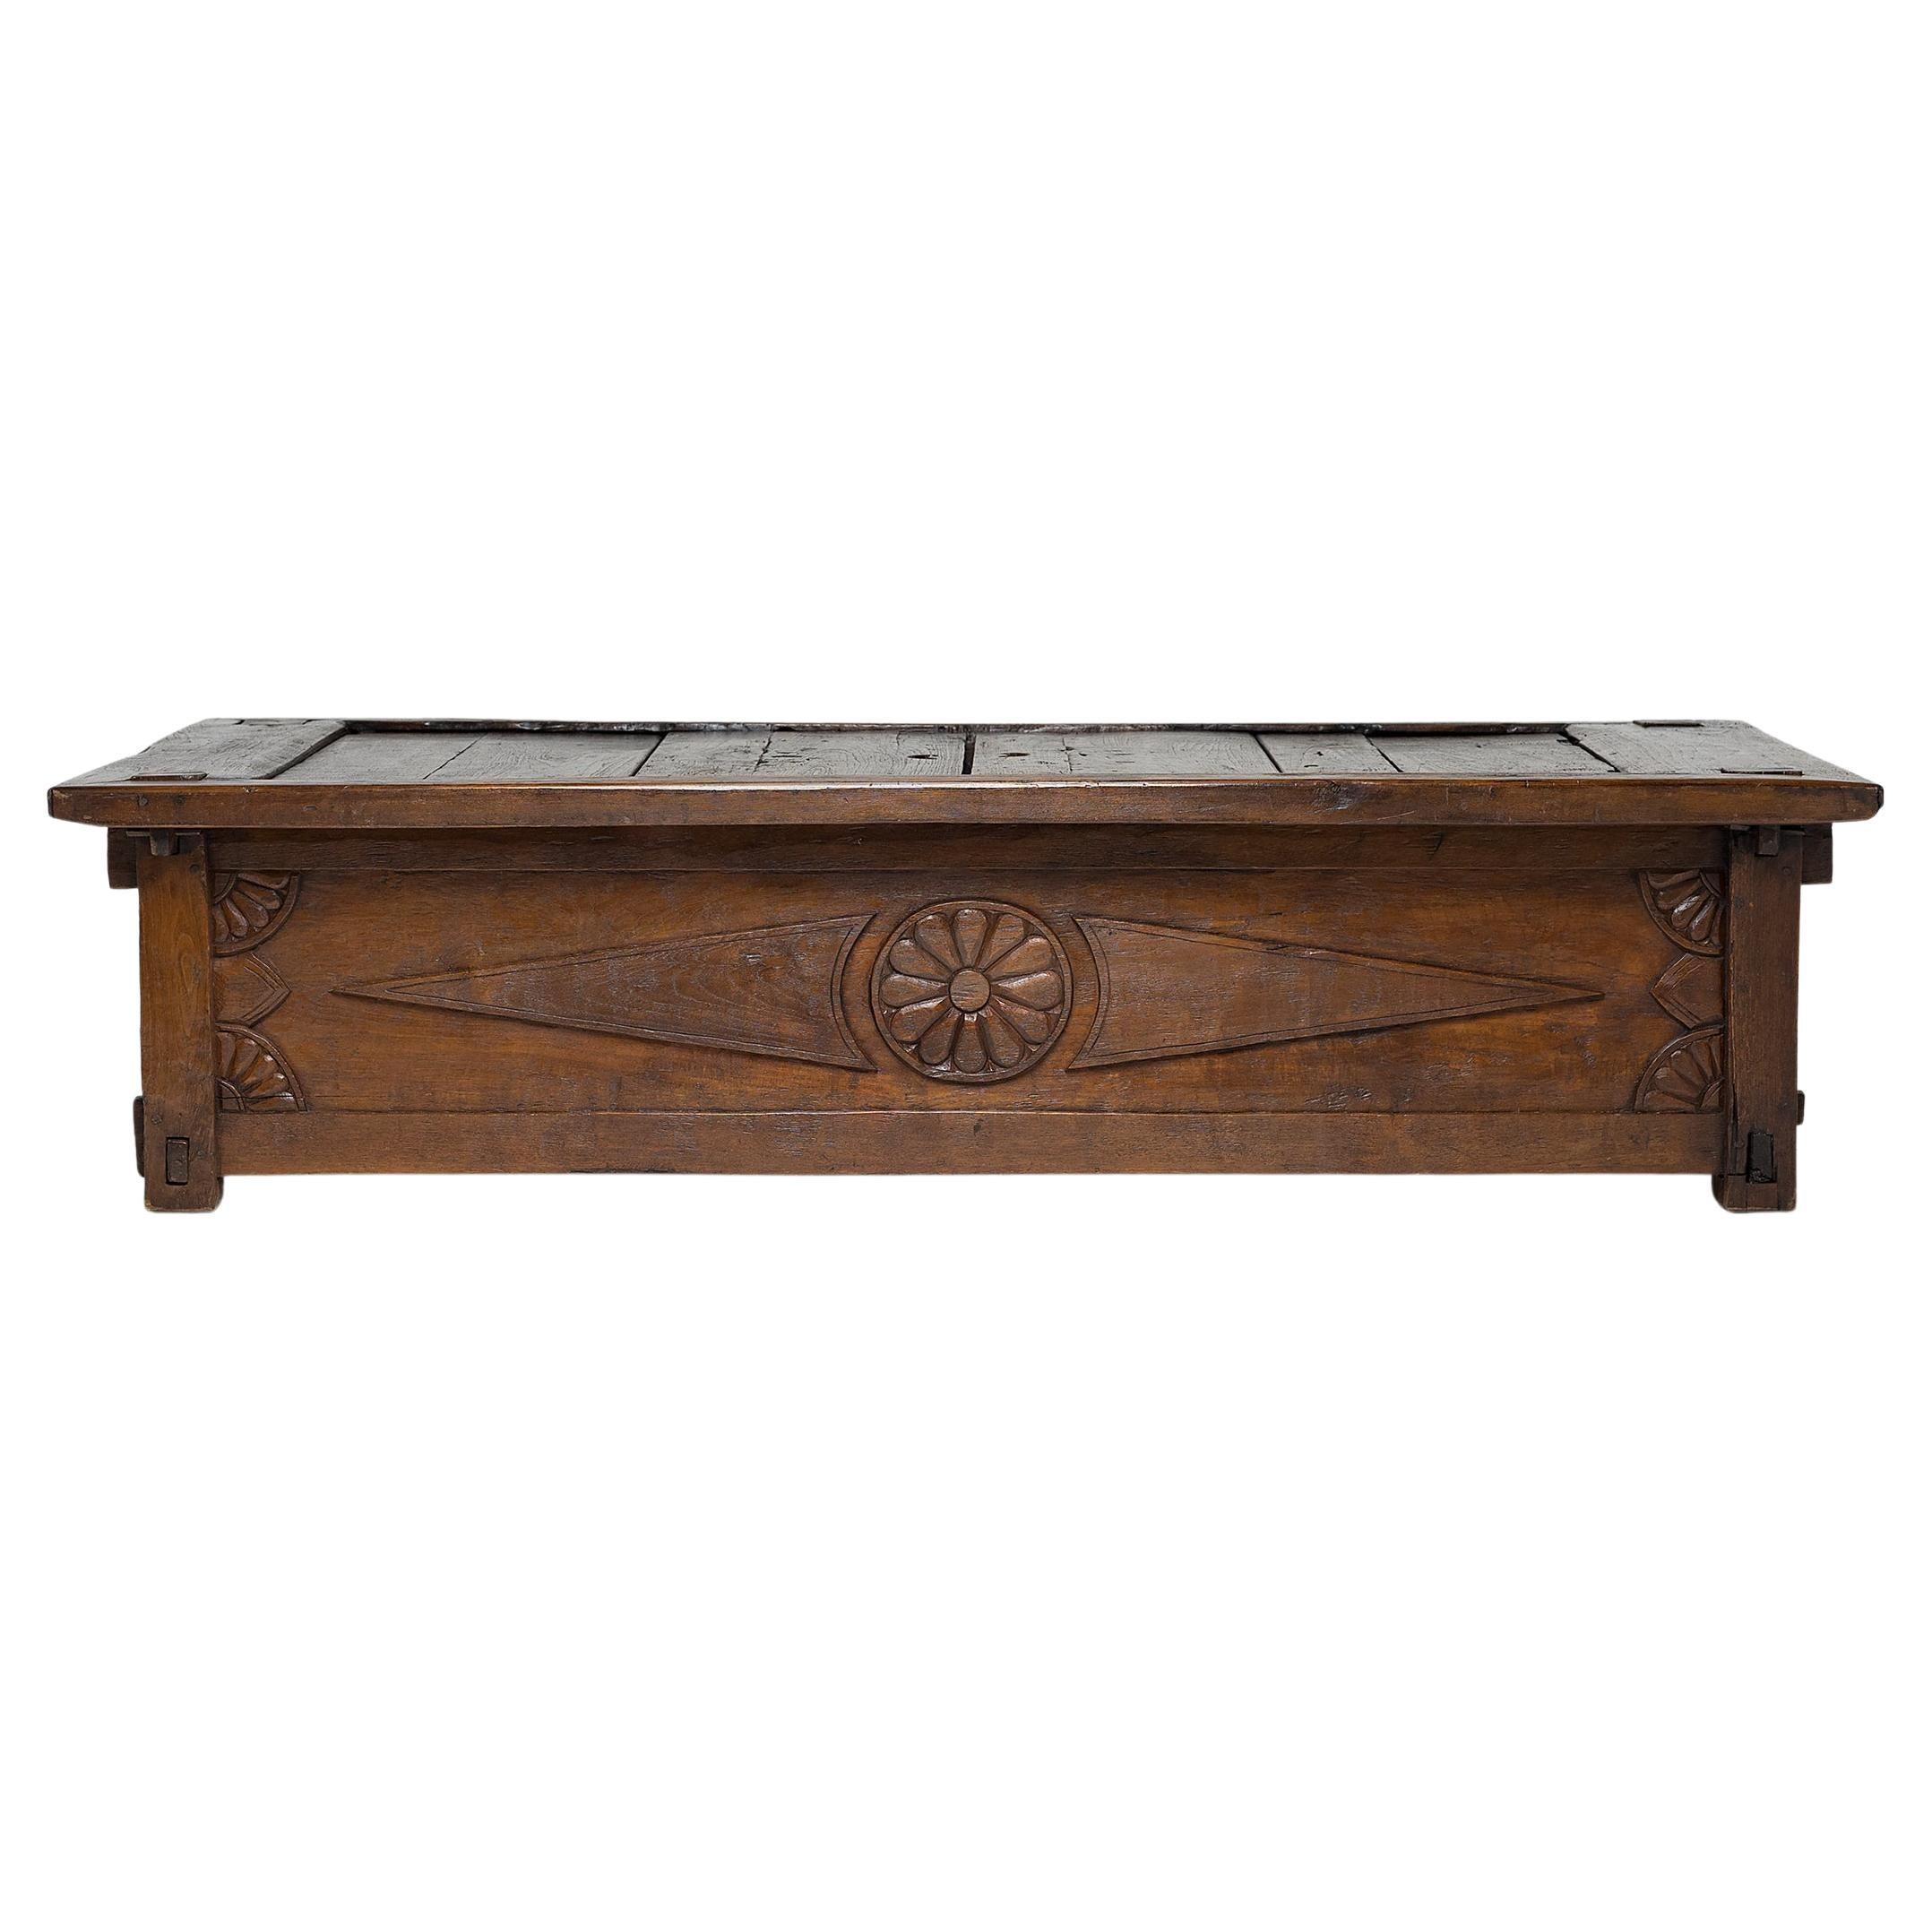 Indonesian Teak Rice Bed, c. 1900 For Sale